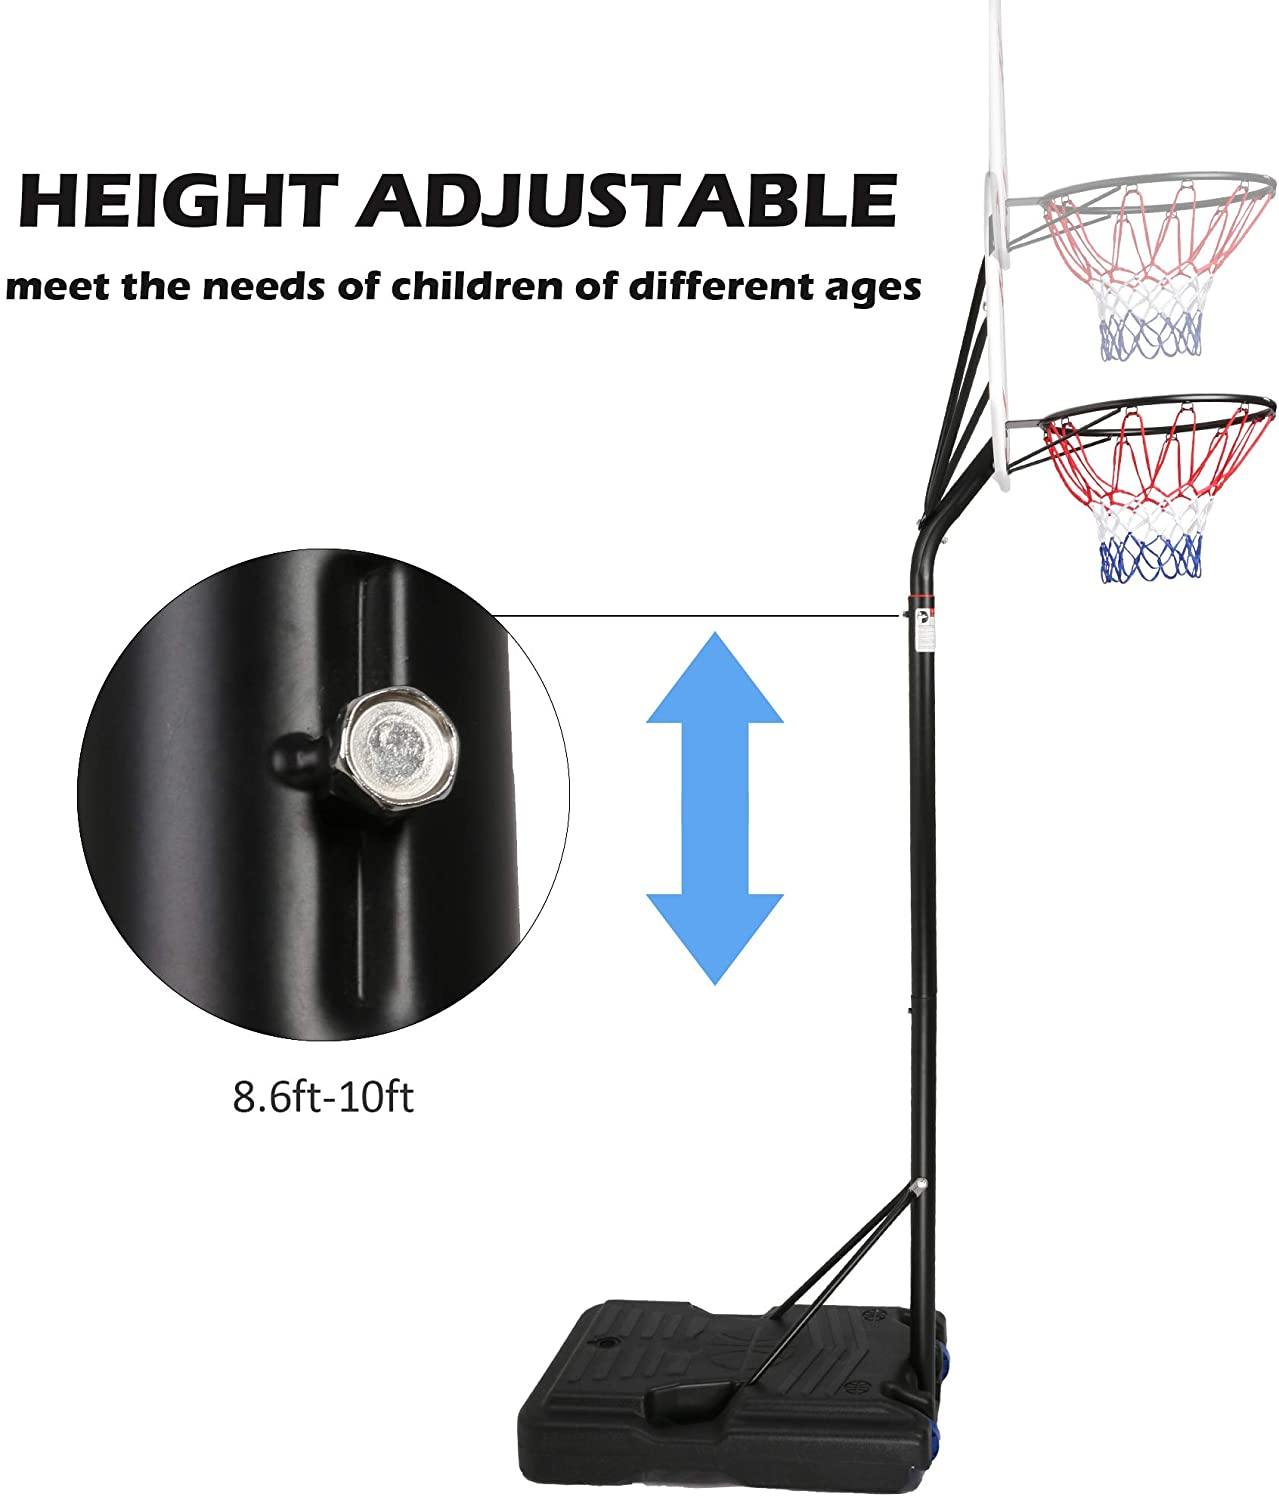 Basketball Hoop for Kids and Family Indoor and Outdoor Portable Basketball Goal System Height Adjustable 8.6ft-10ft - Bosonshop